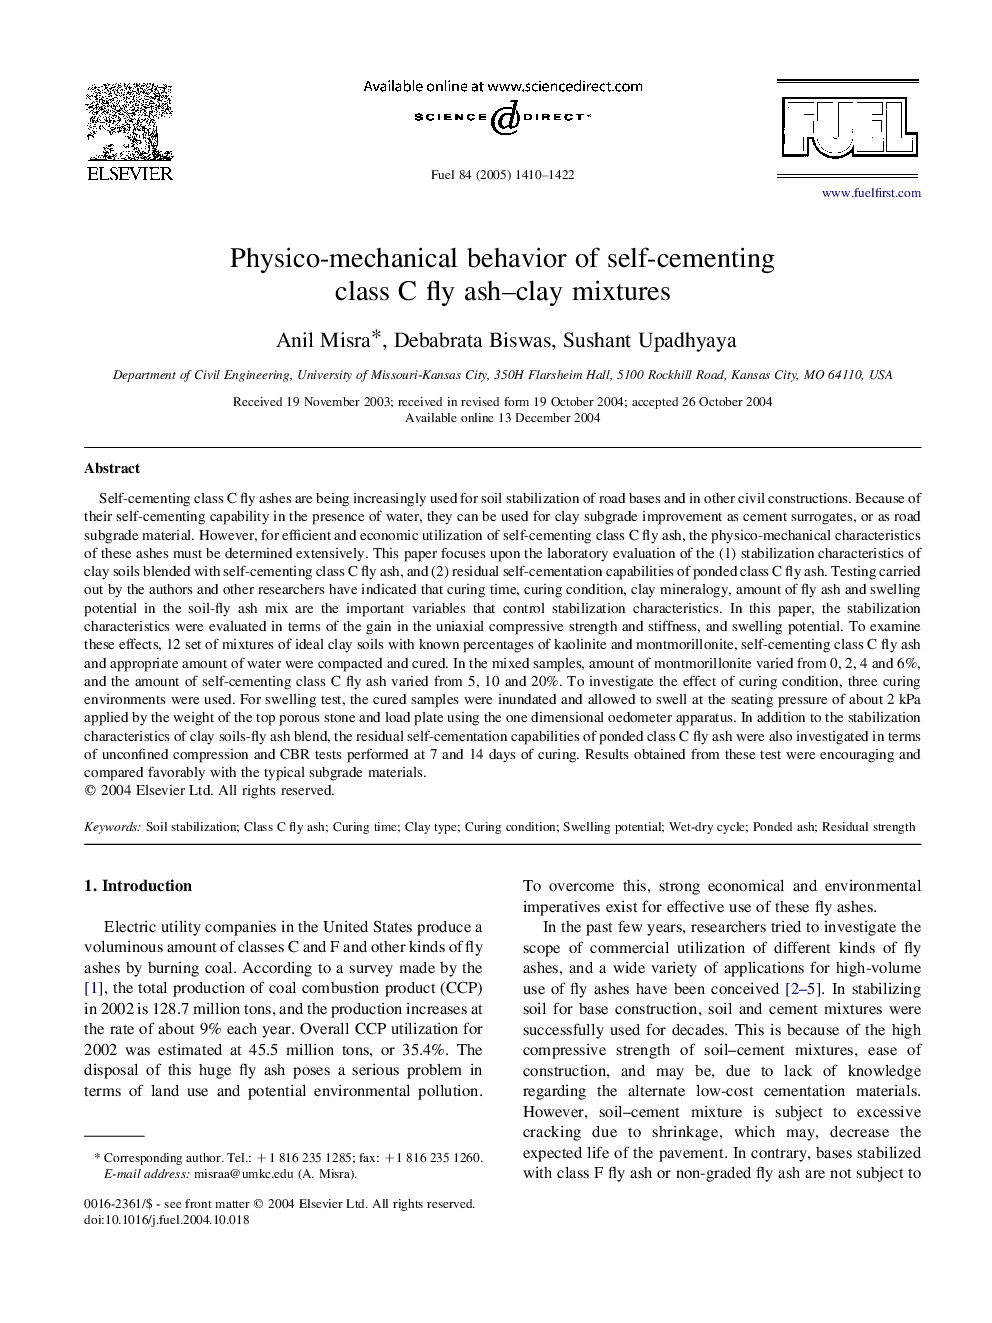 Physico-mechanical behavior of self-cementing class C fly ash-clay mixtures